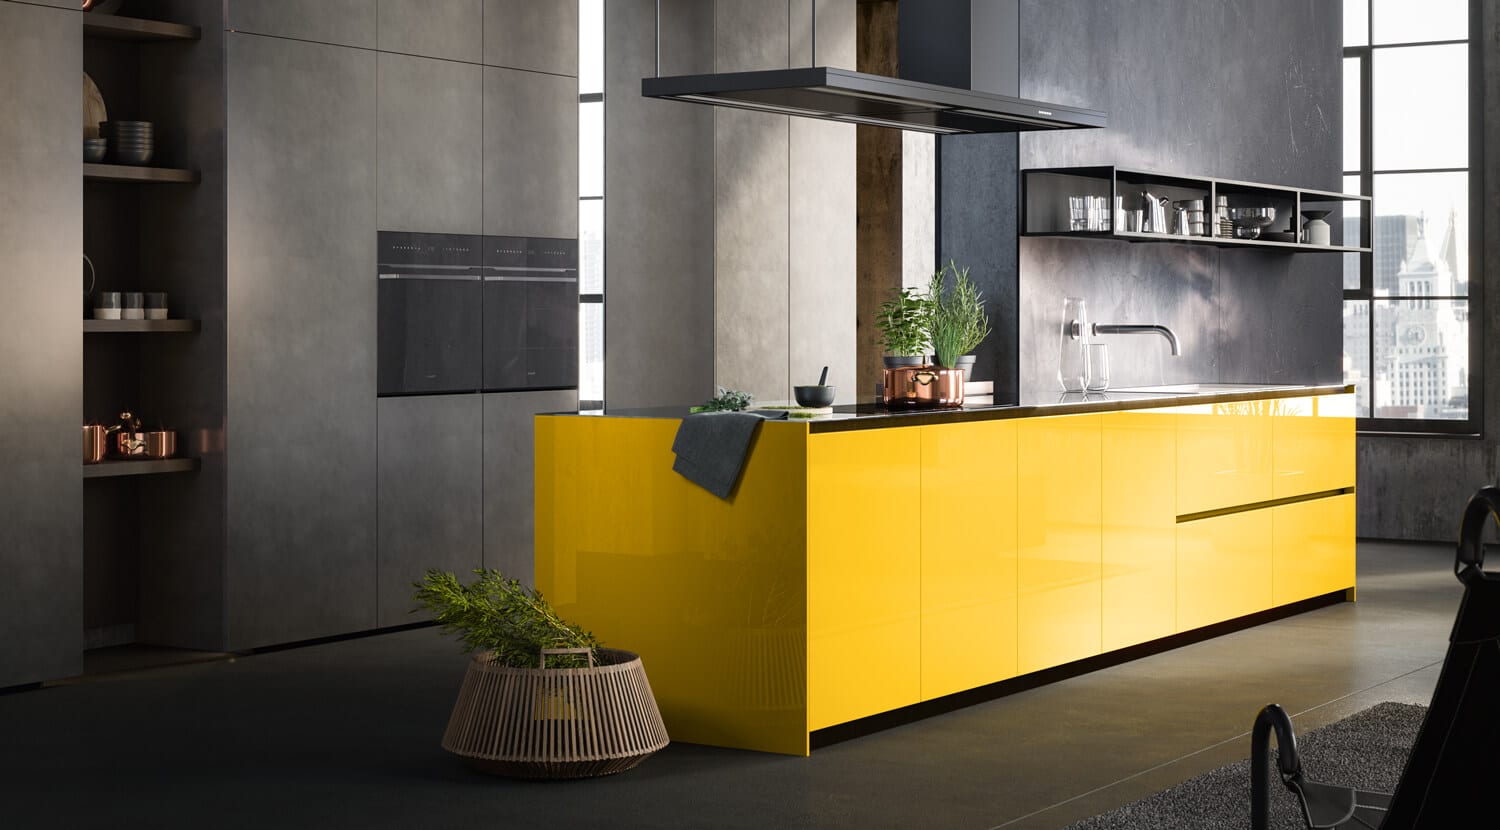 Base cabinets in Giallo Zolfo high gloss lacquer. Tall units in Ghisa Urban lacquer.